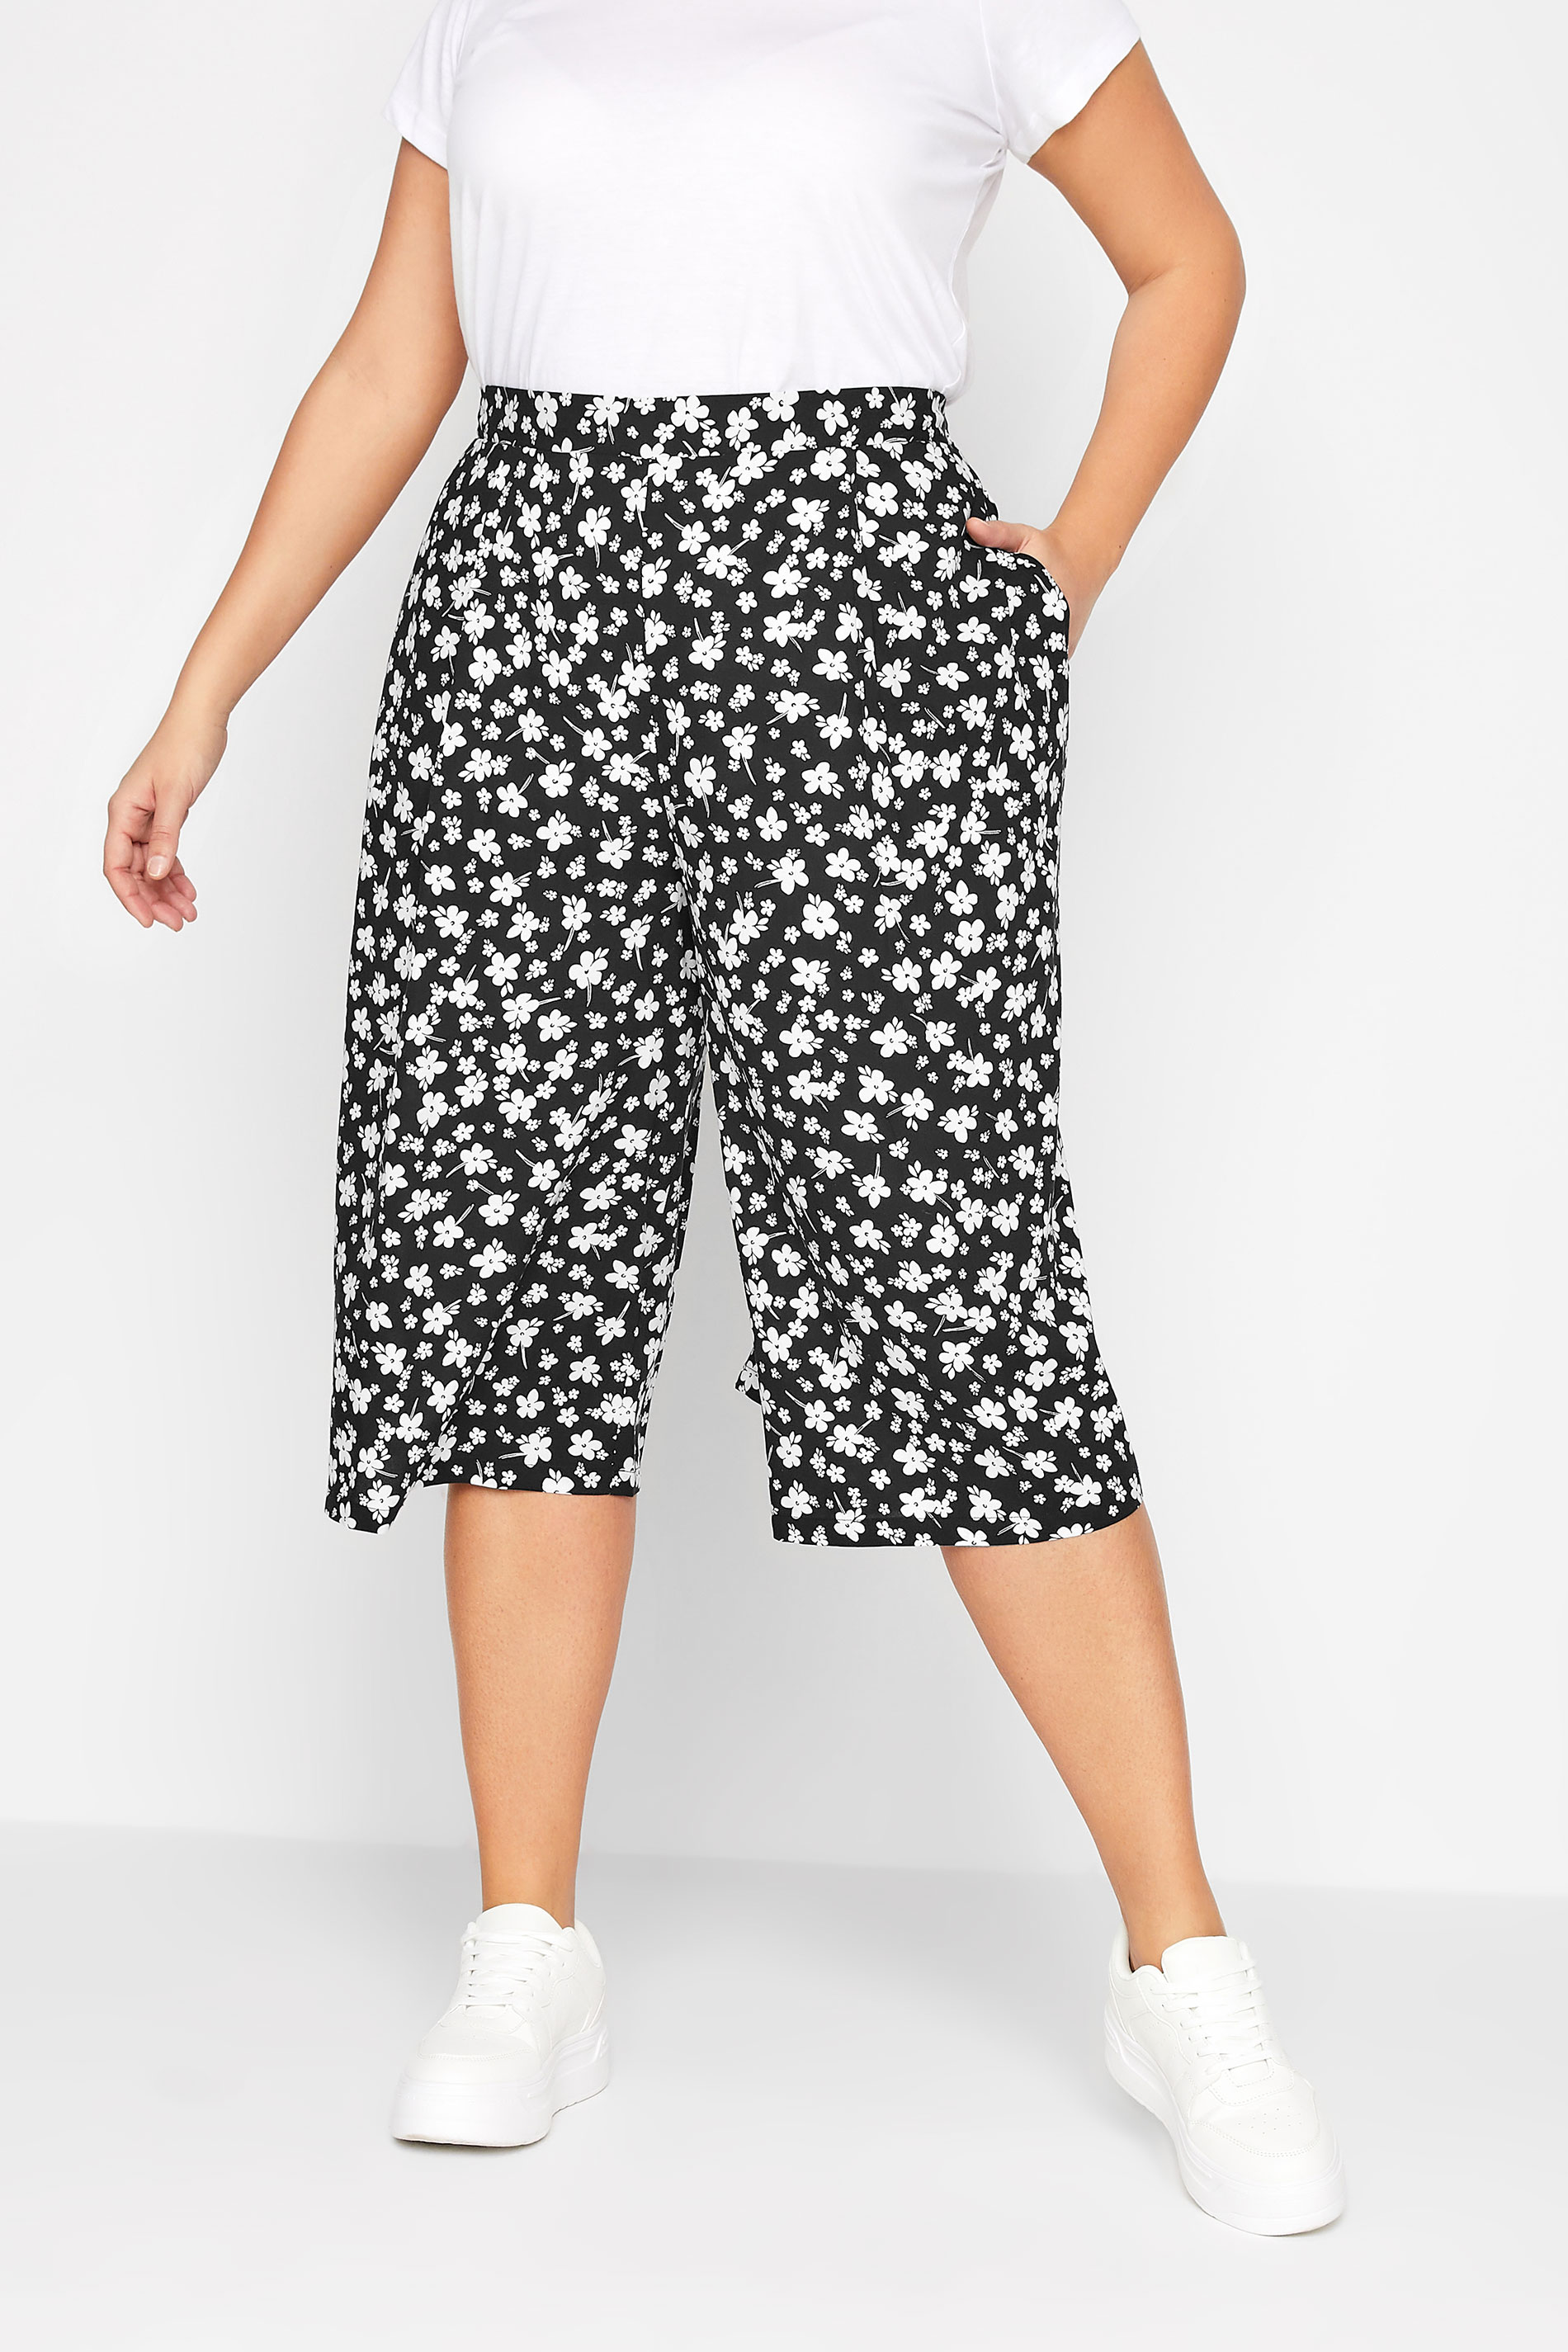 YOURS Curve Black & White Floral Print Culottes | Yours Clothing 1